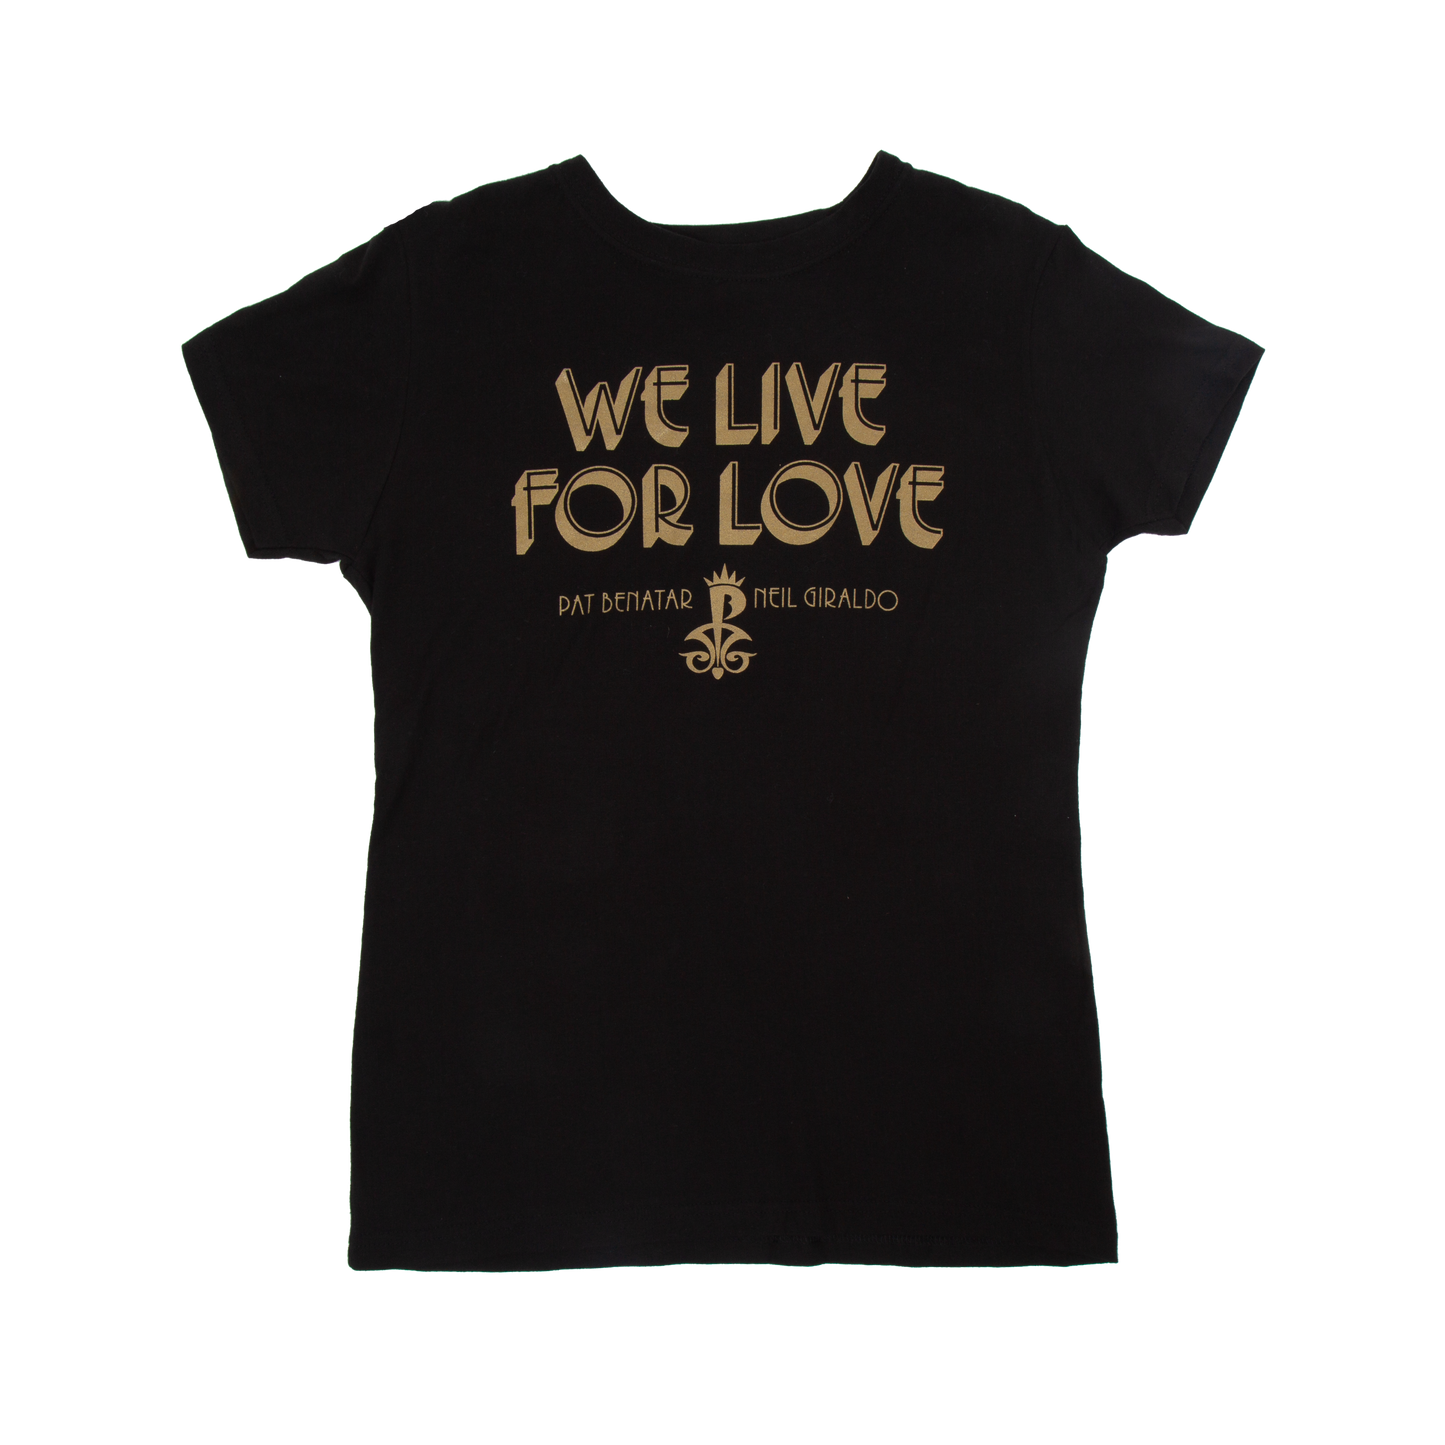 We Live for Love Tee